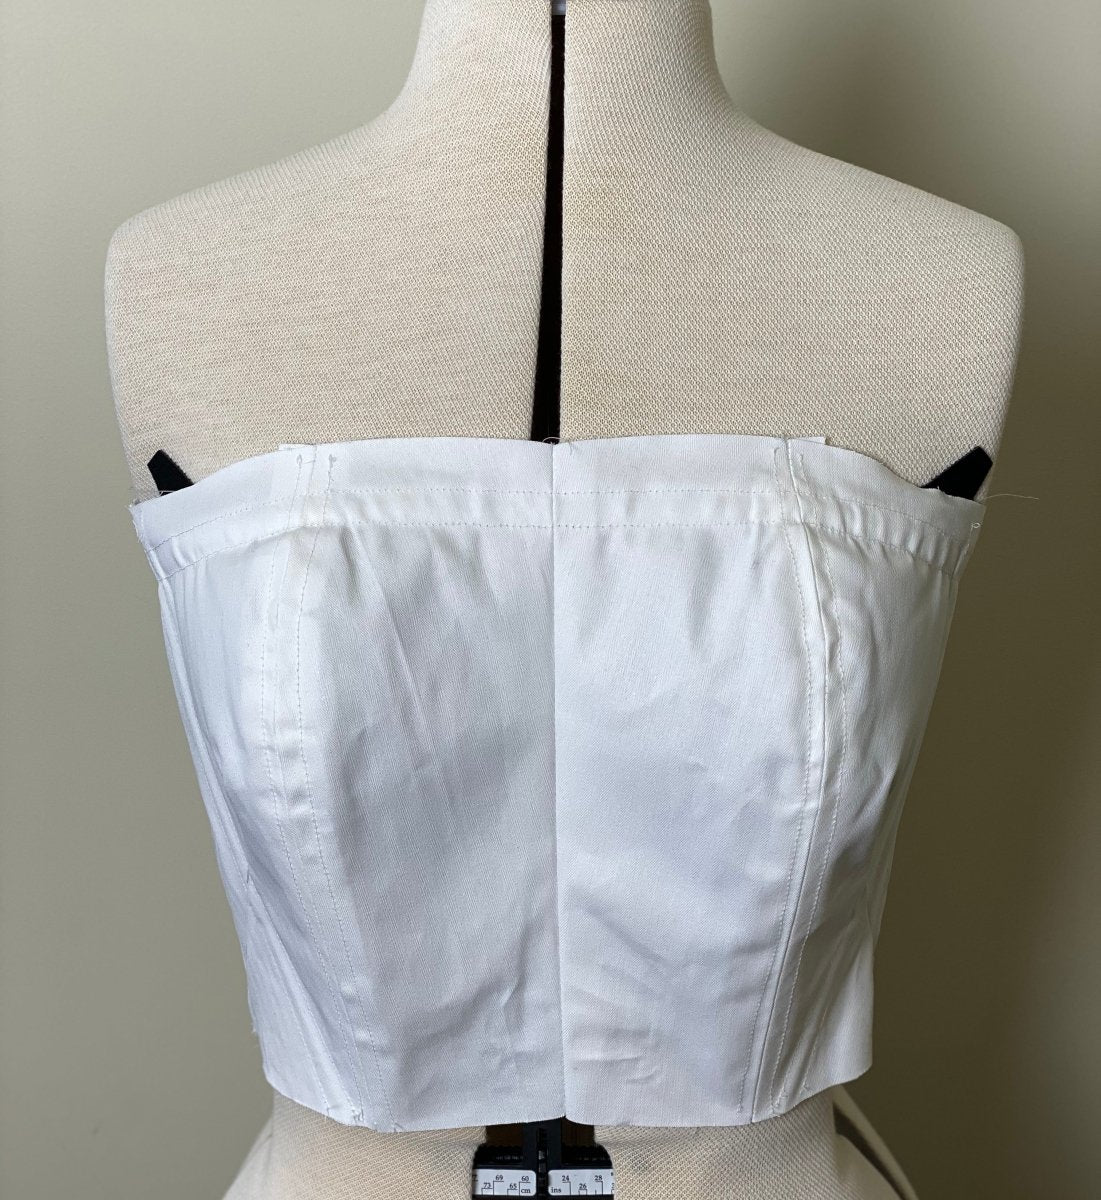 The support layer that could just hold your strapless dress in place! –  Sewing Gem